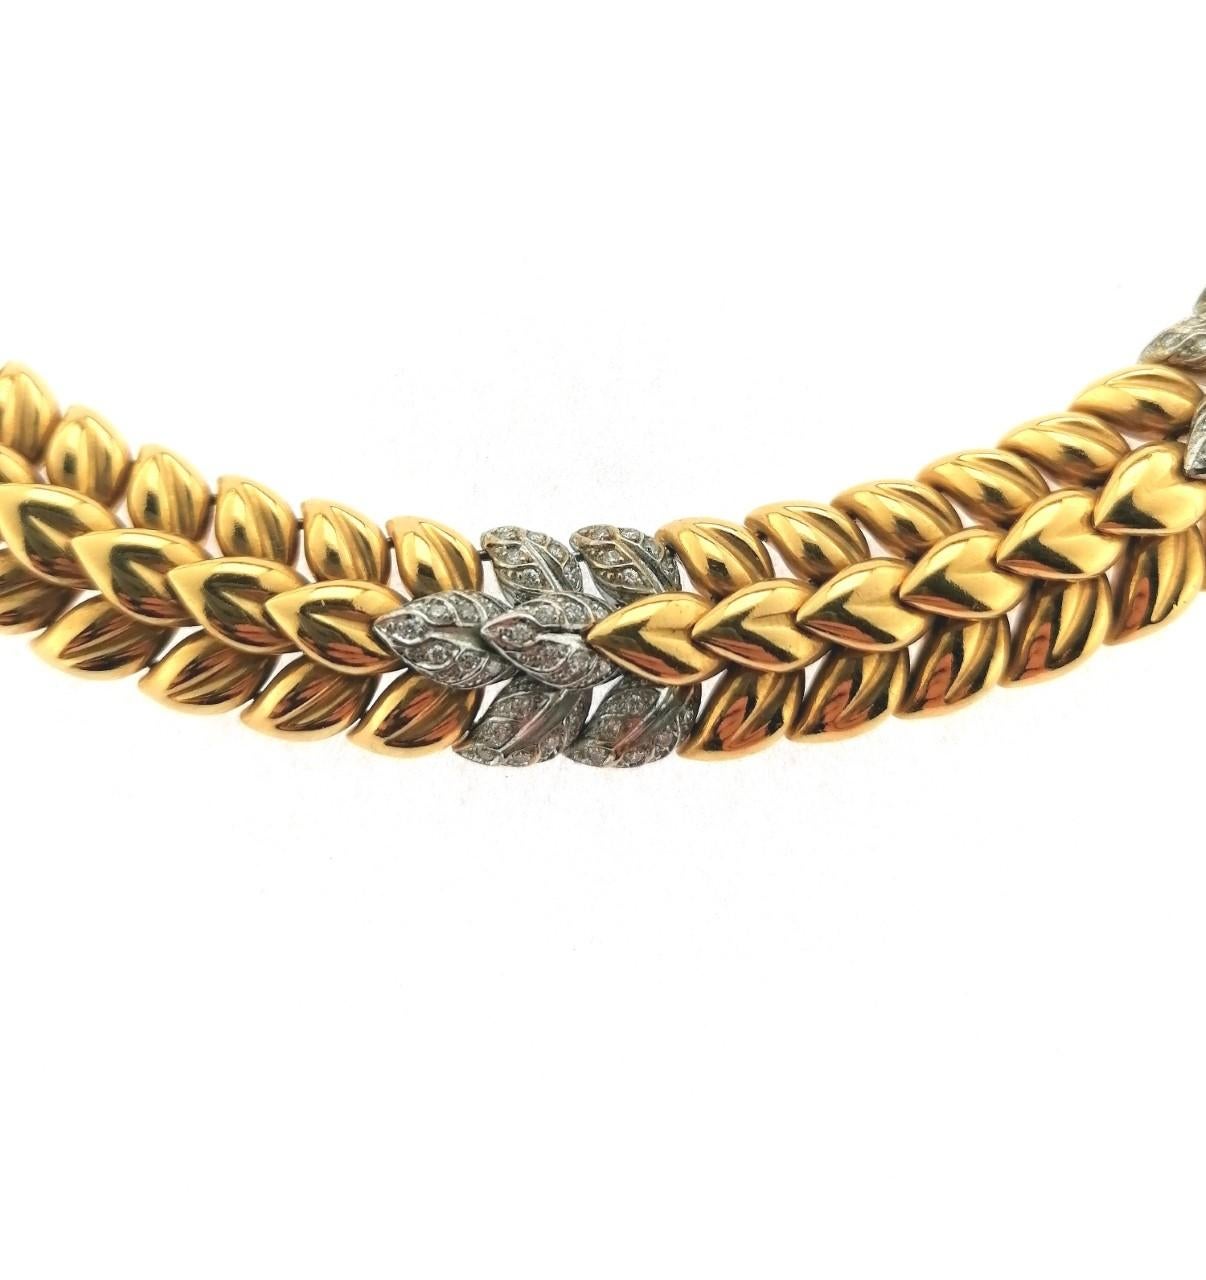 Wonderful 18 Karats White and Yellow Gold Choker with Brilliant Cut Diamonds with leaves shape. It is a consistent choker very well done that gives a touch of elegance because It is very tight around the neck. It has a lenght of 45 centimeters.